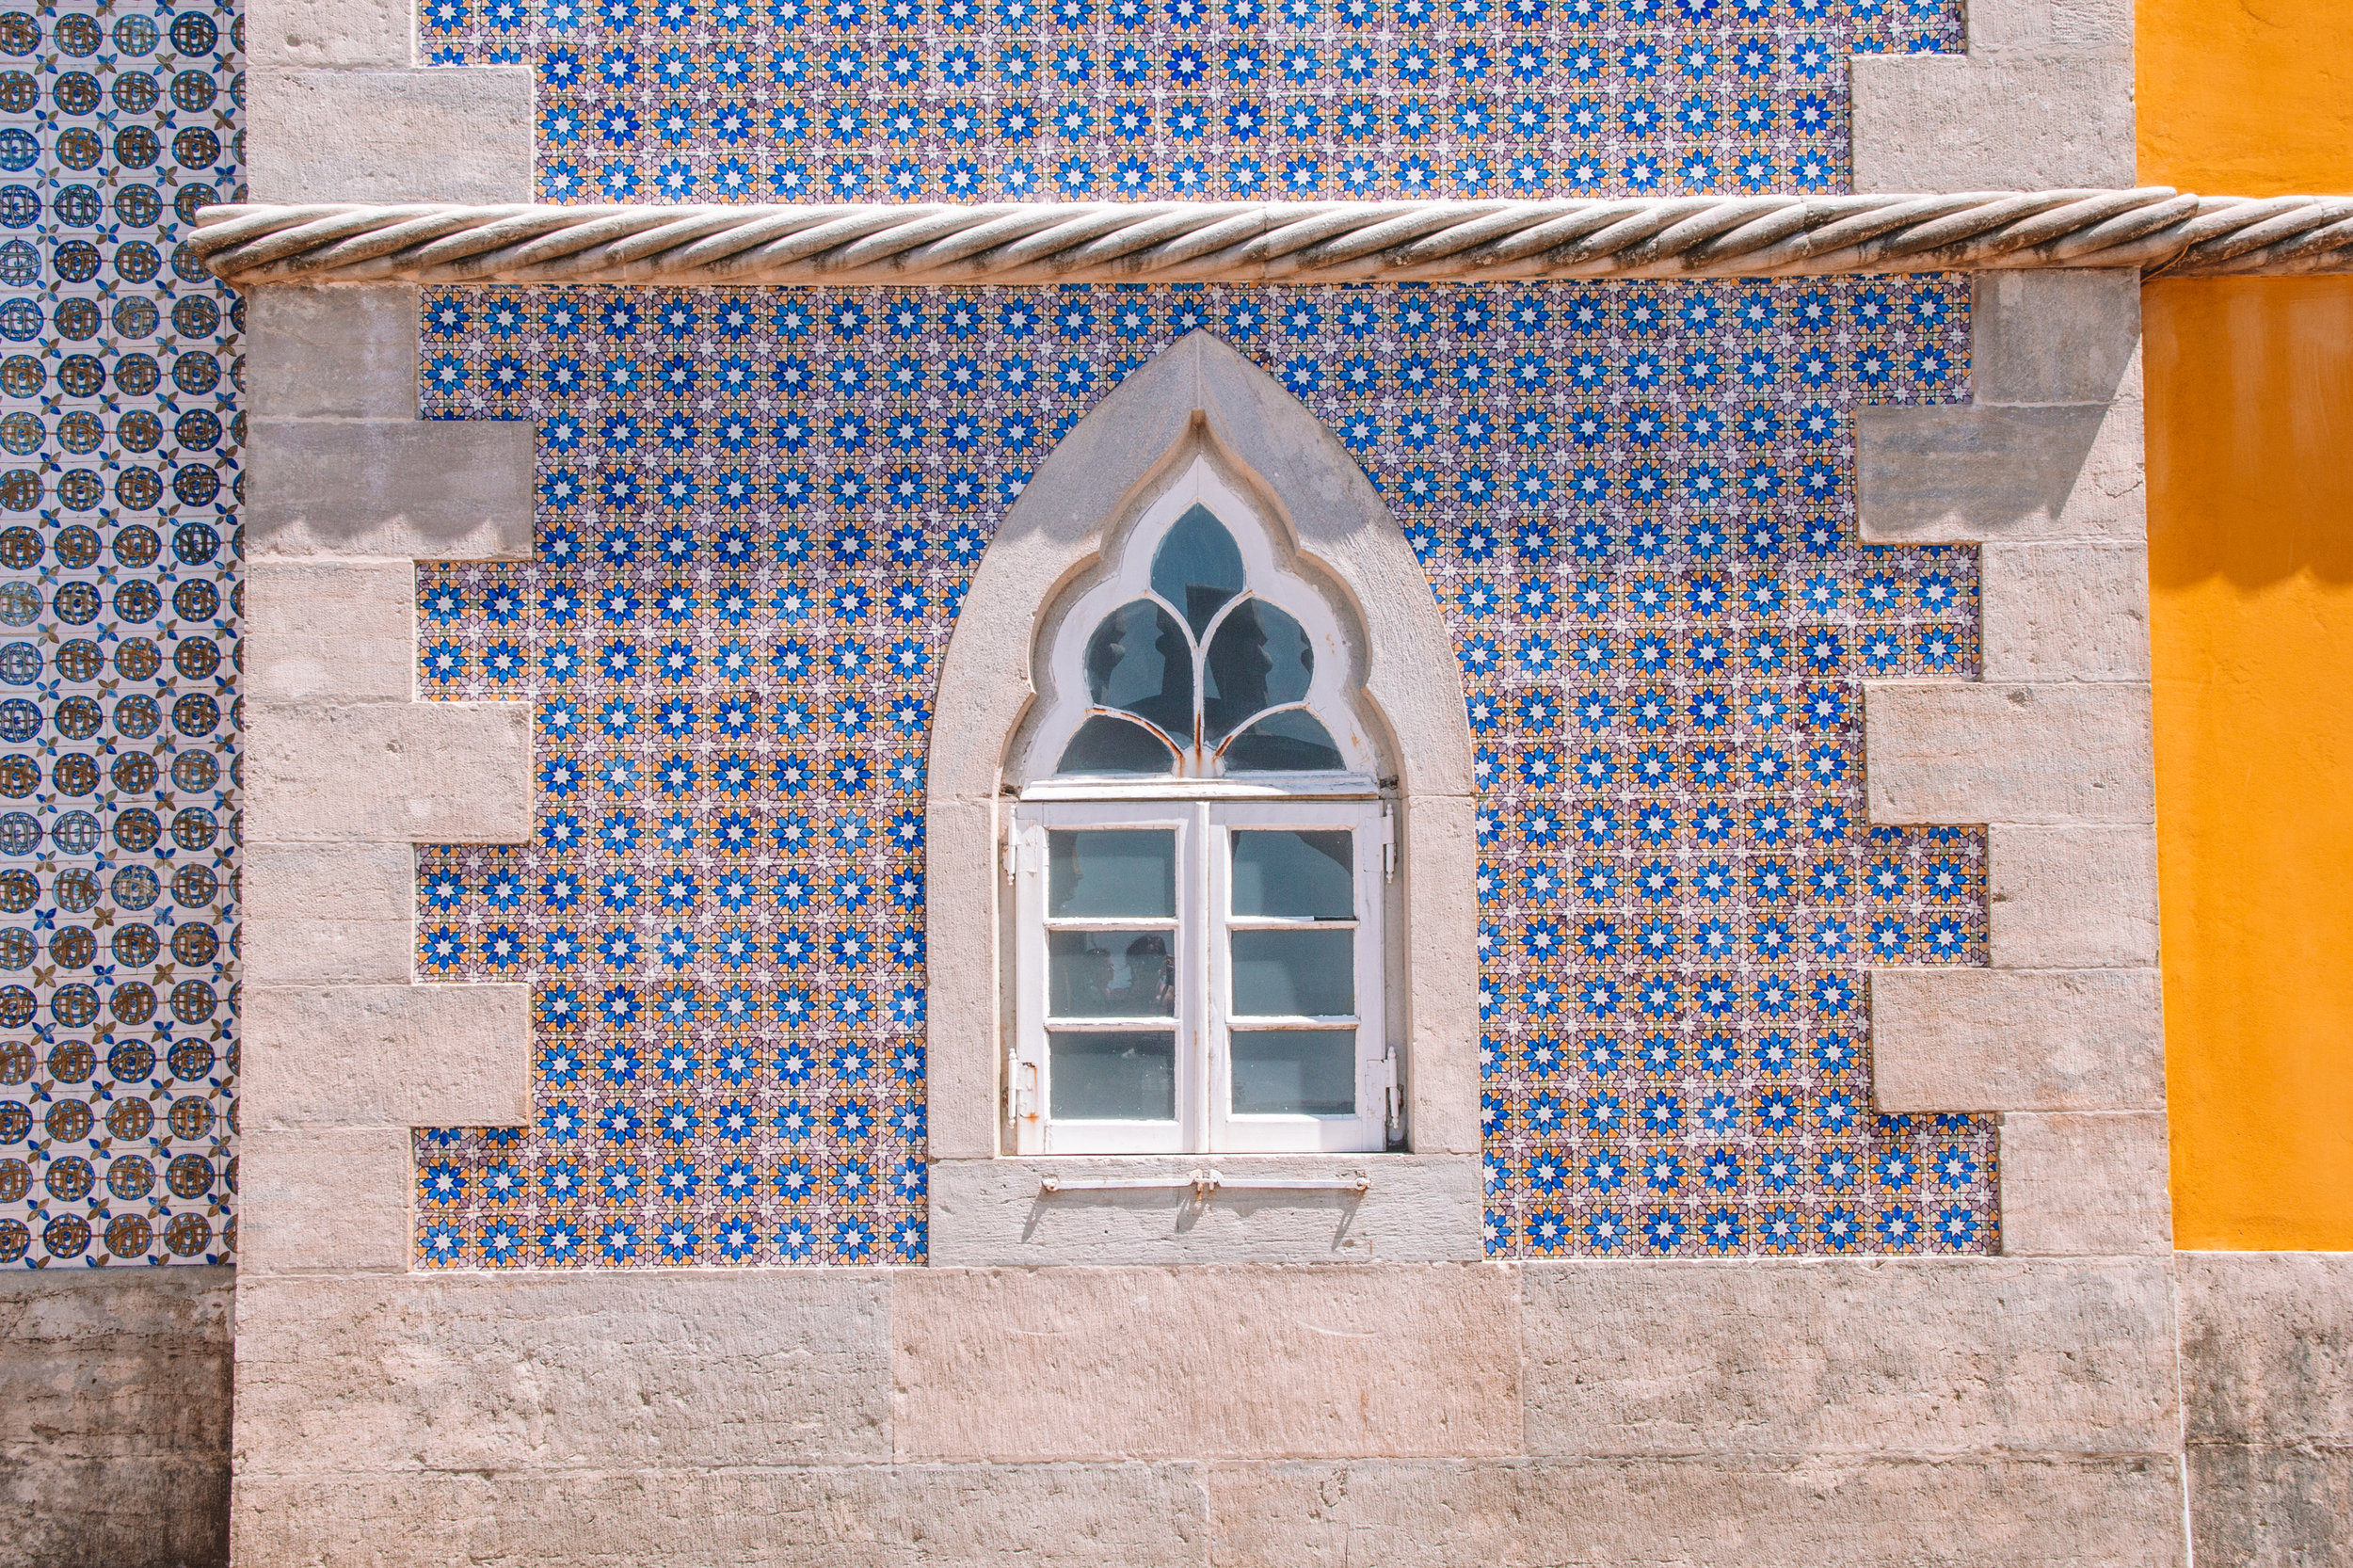 A close up of a window and blue tiled wall of Pena Palace